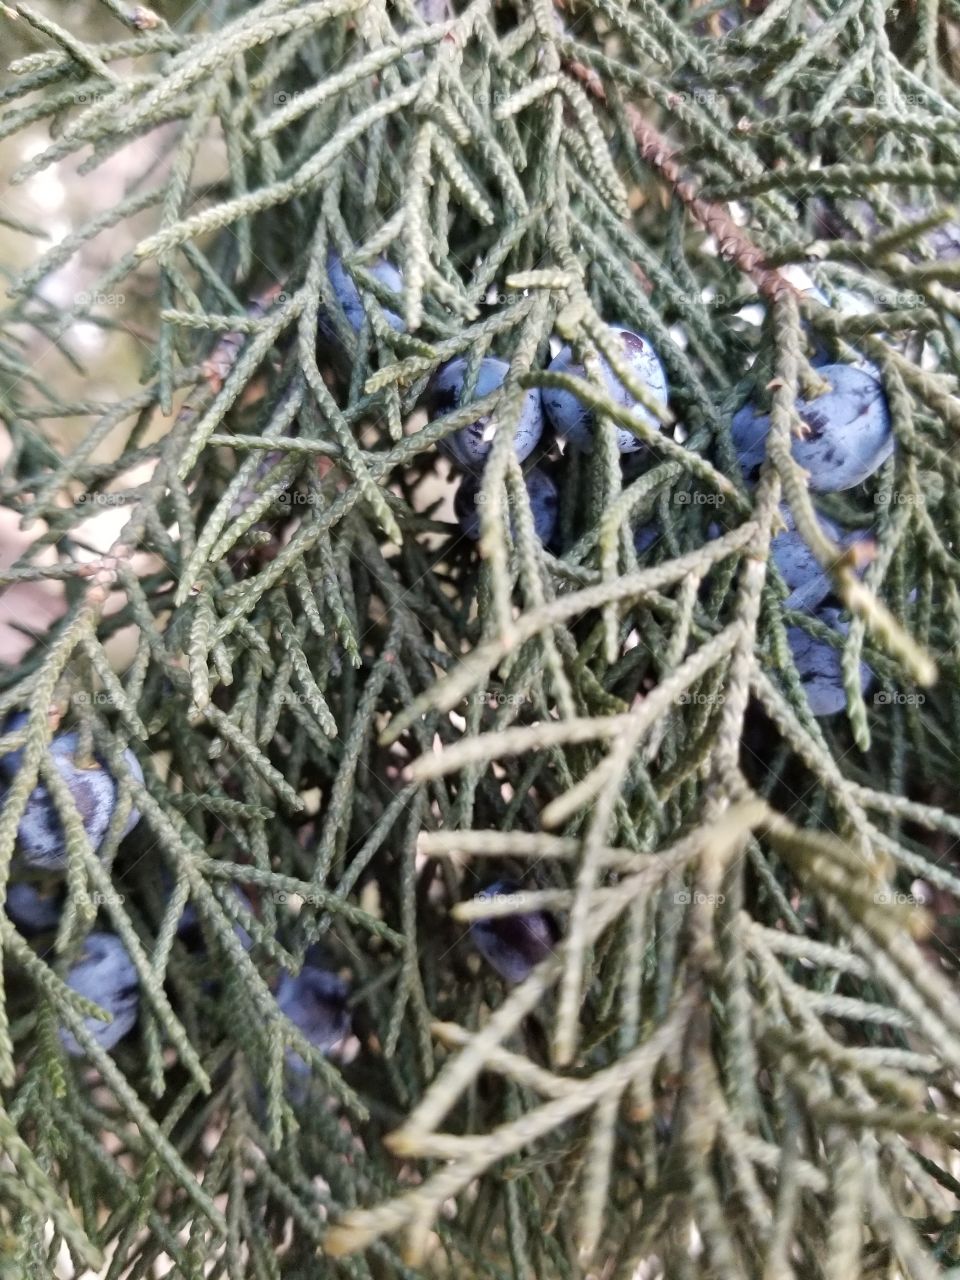 Some Type of Blue Berries on an Evergreen